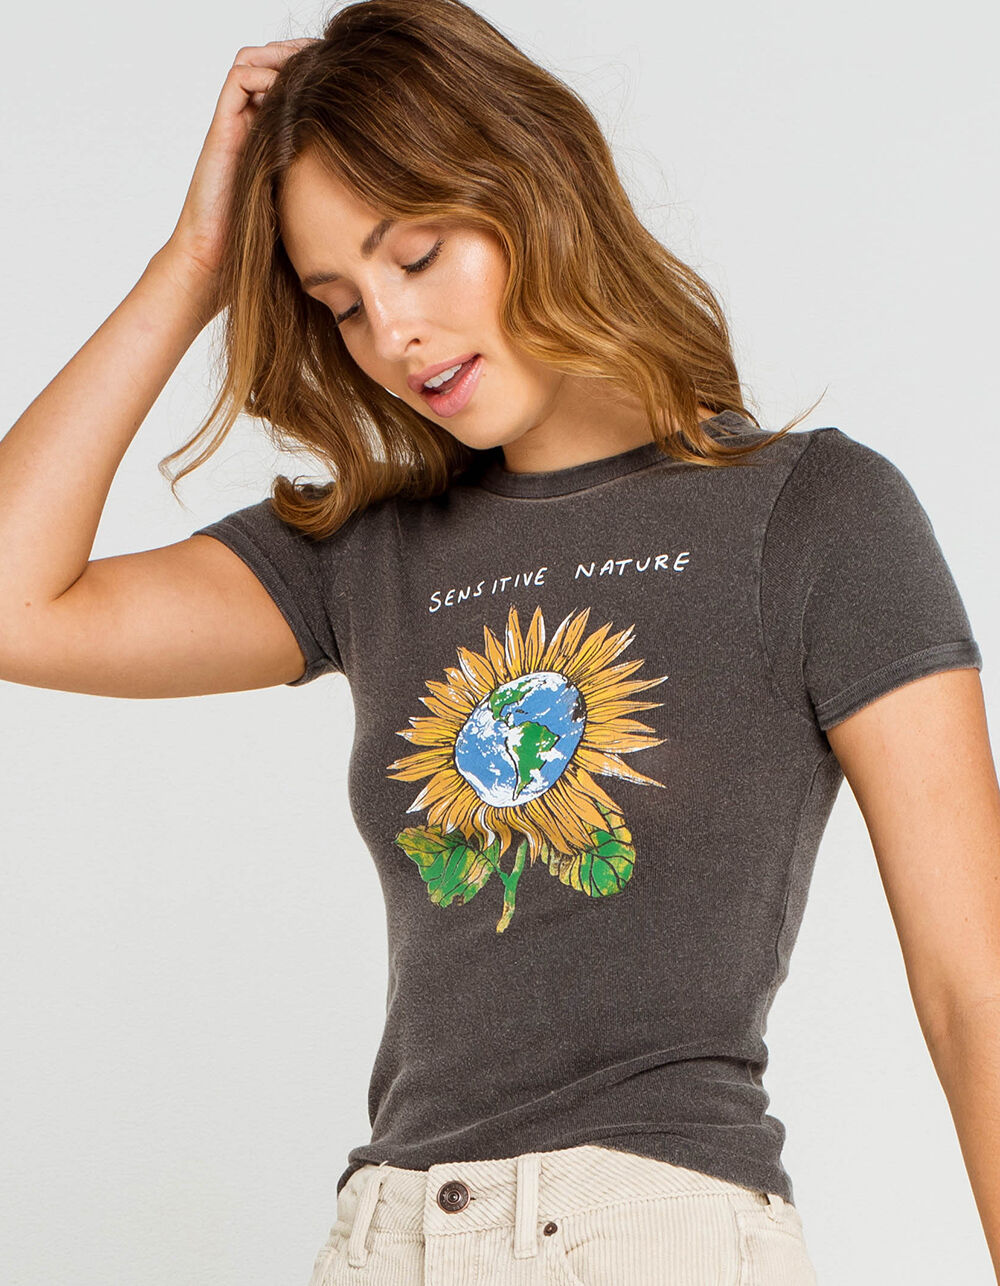 BDG Urban Outfitters Sensitive Nature Womens Tee - GRAY | Tillys